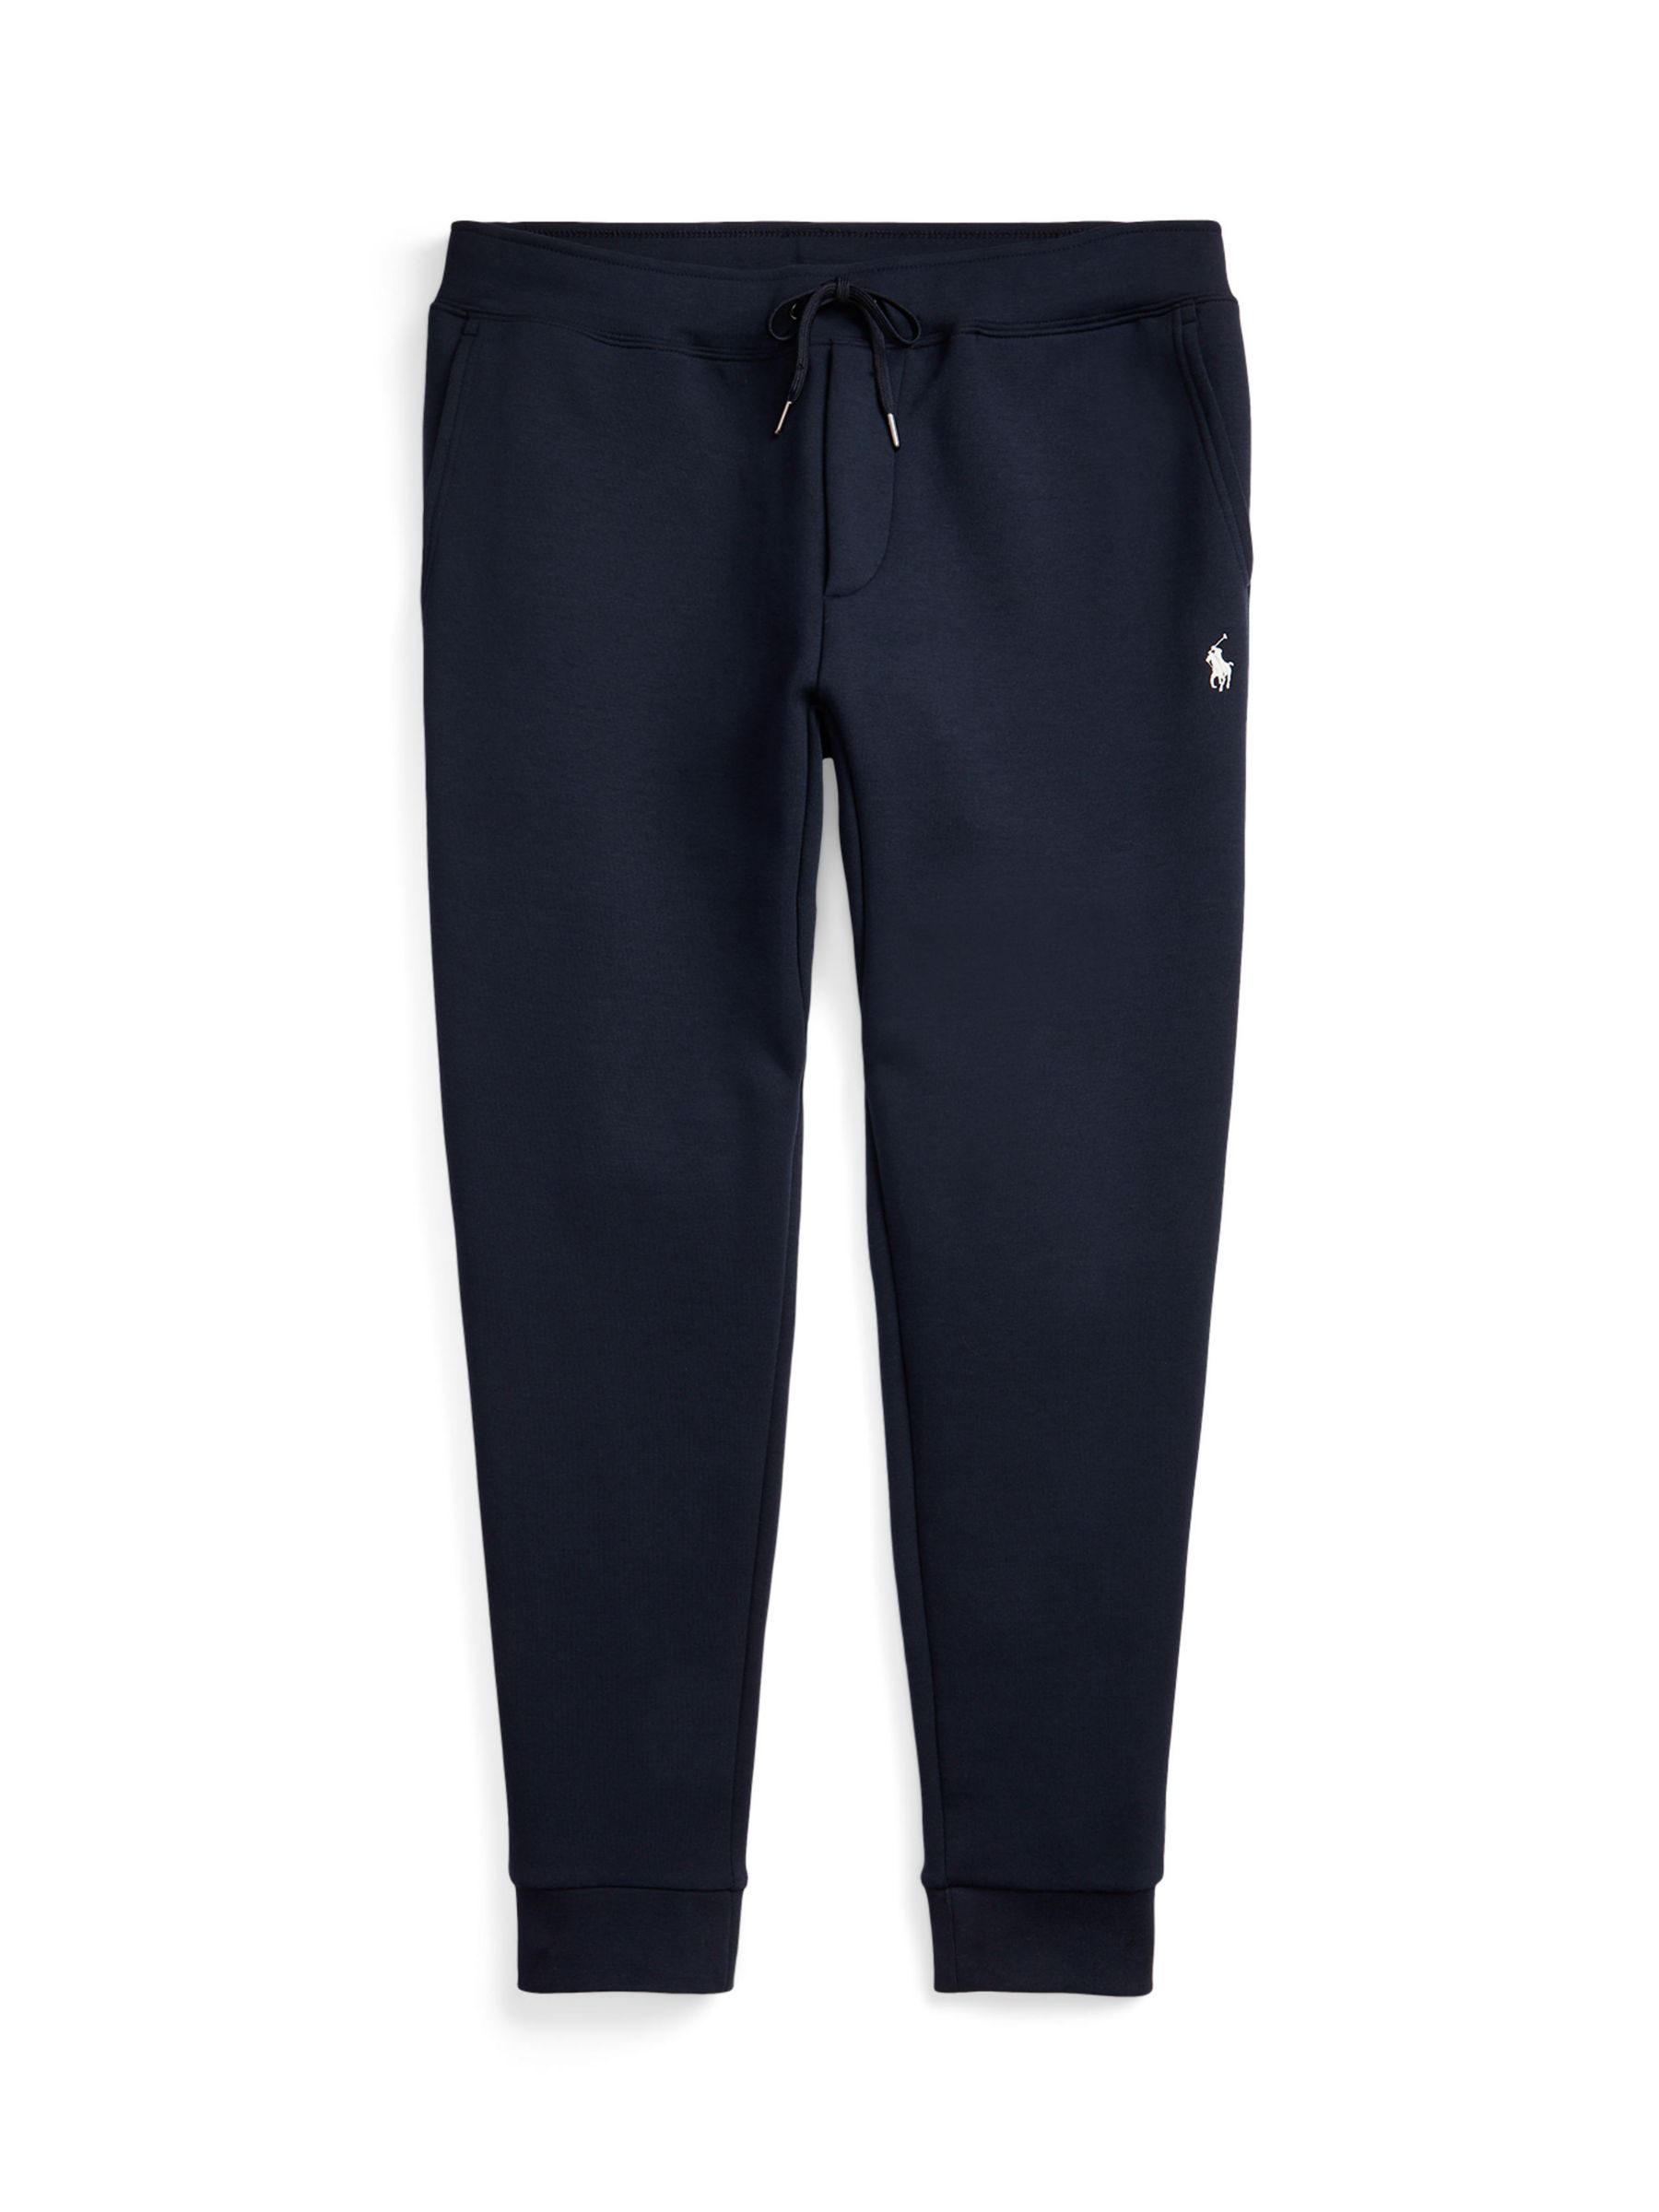 Polo Ralph Lauren Double Knit Trousers, Aviator Navy at John Lewis ...